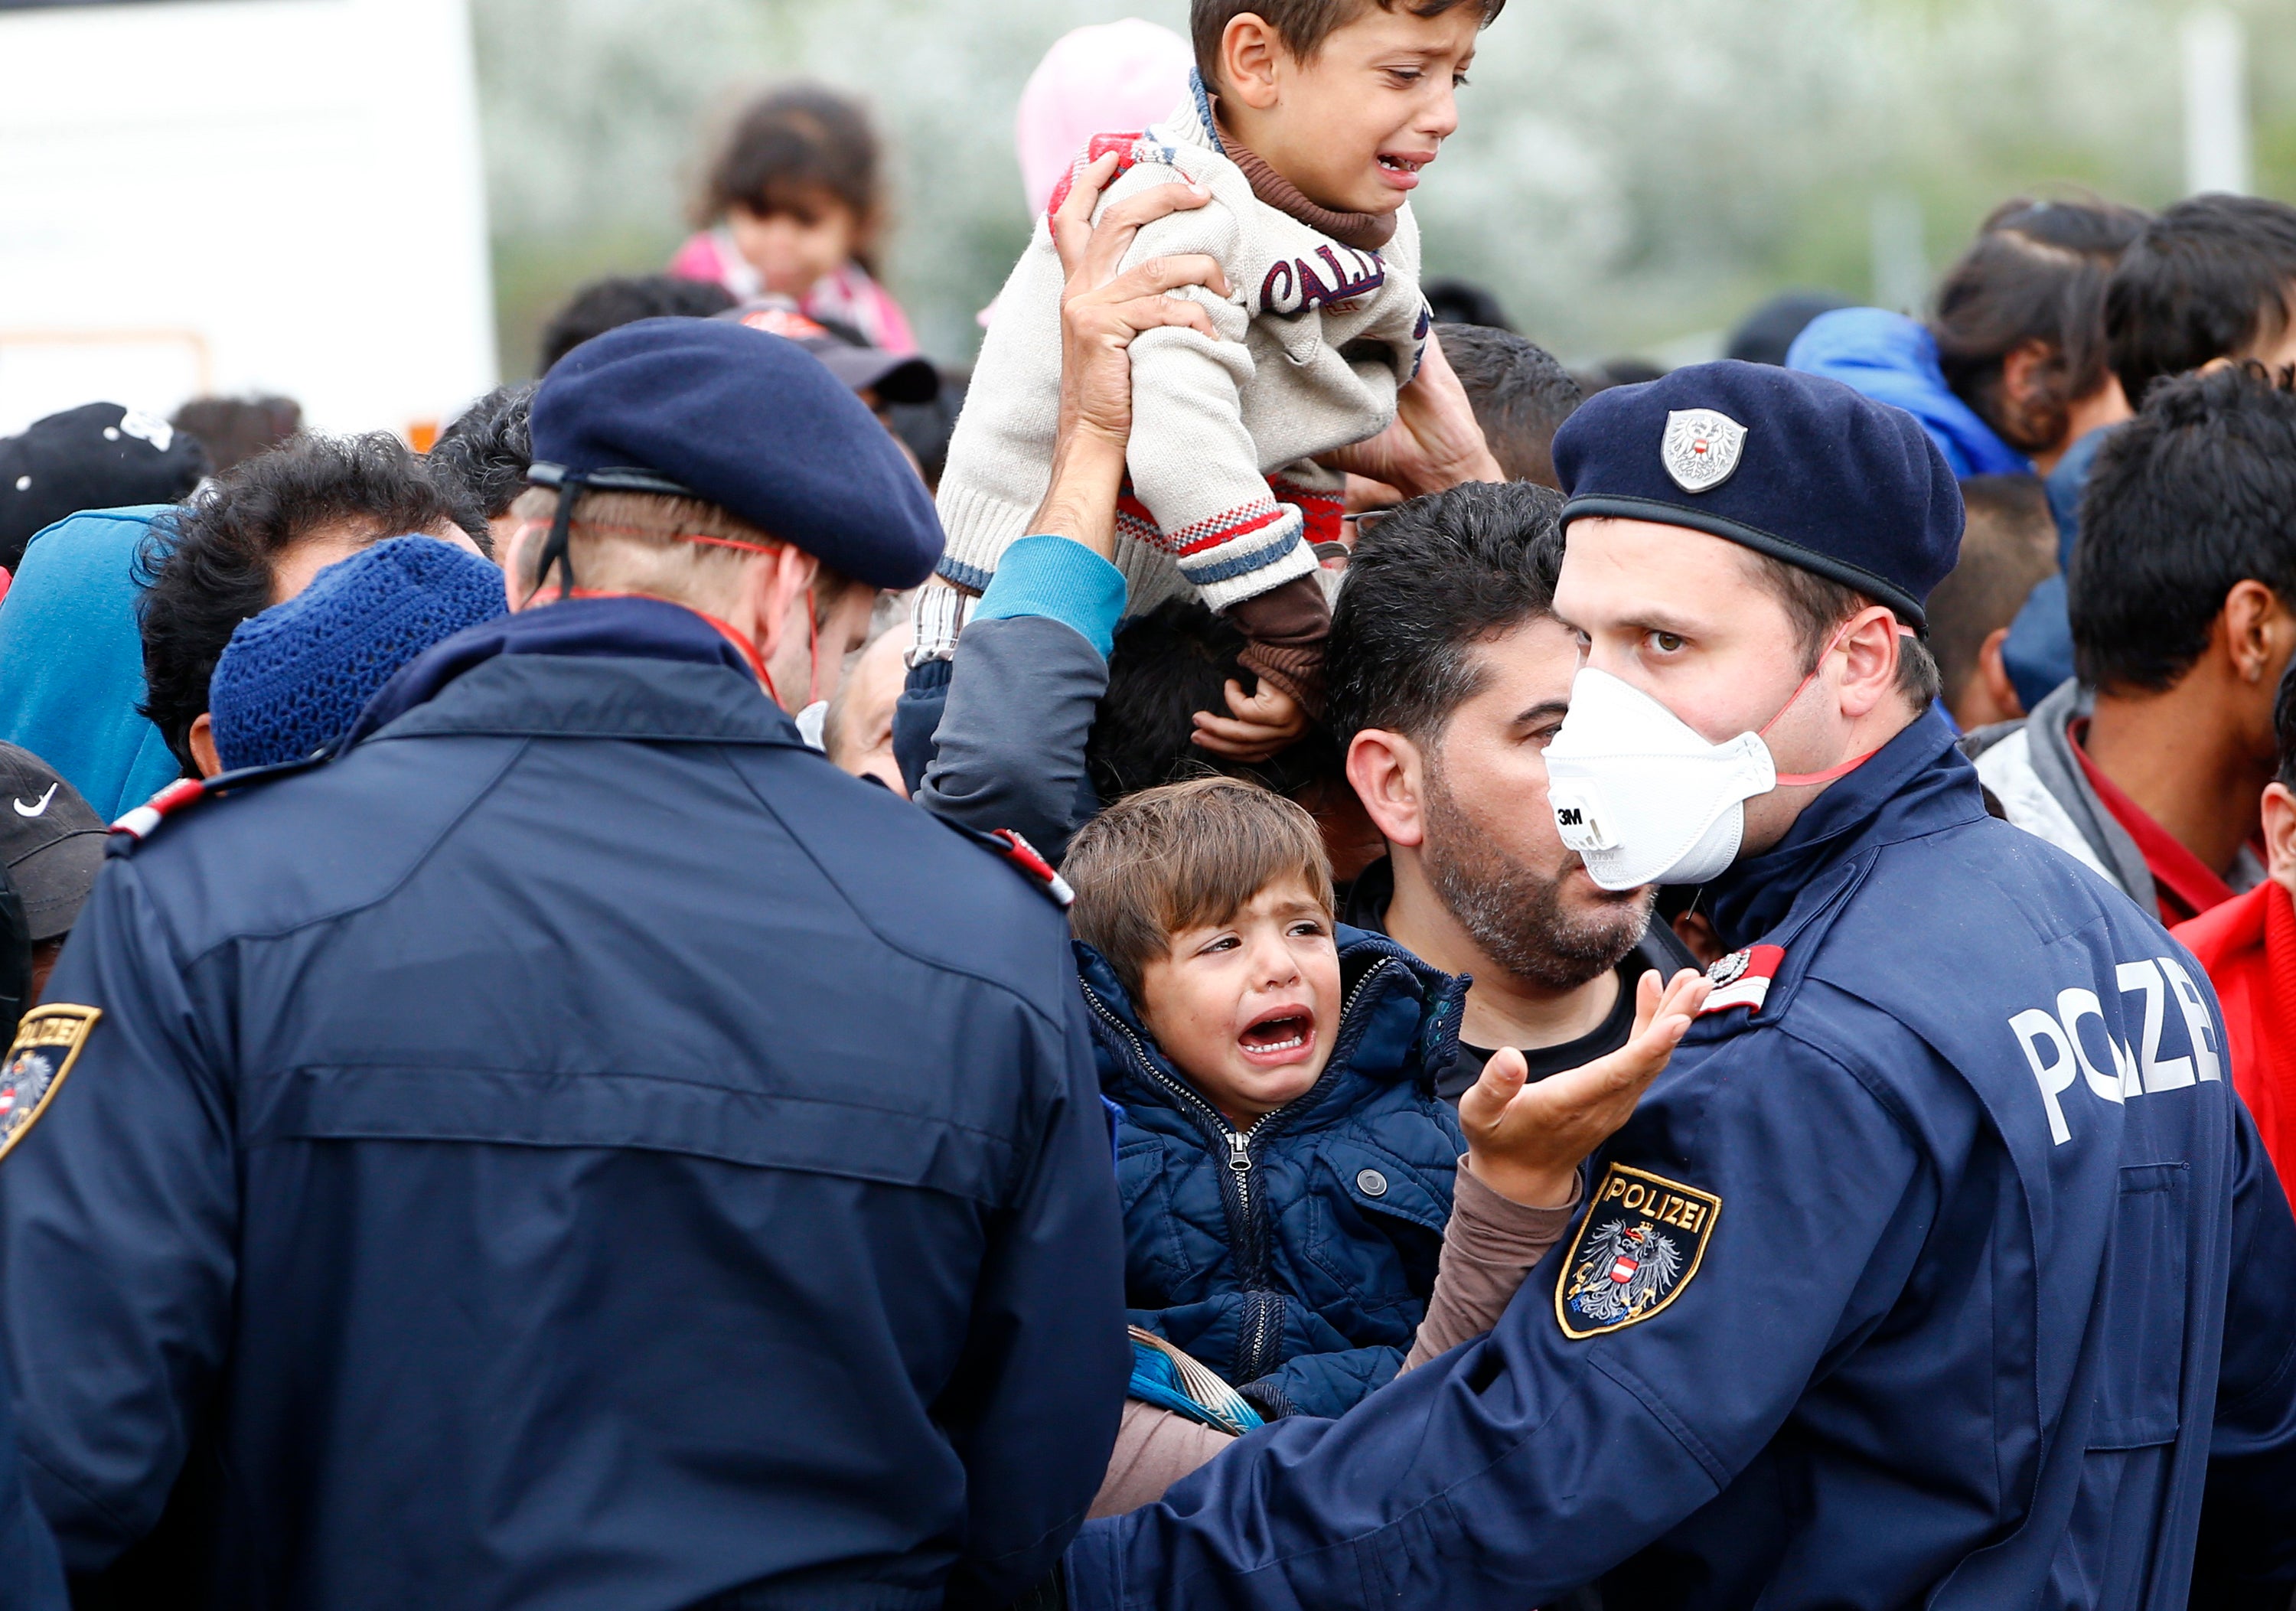 Police struggle to maintain order as refugees attempt to leave the border crossing in Nickelsdorf, Austria